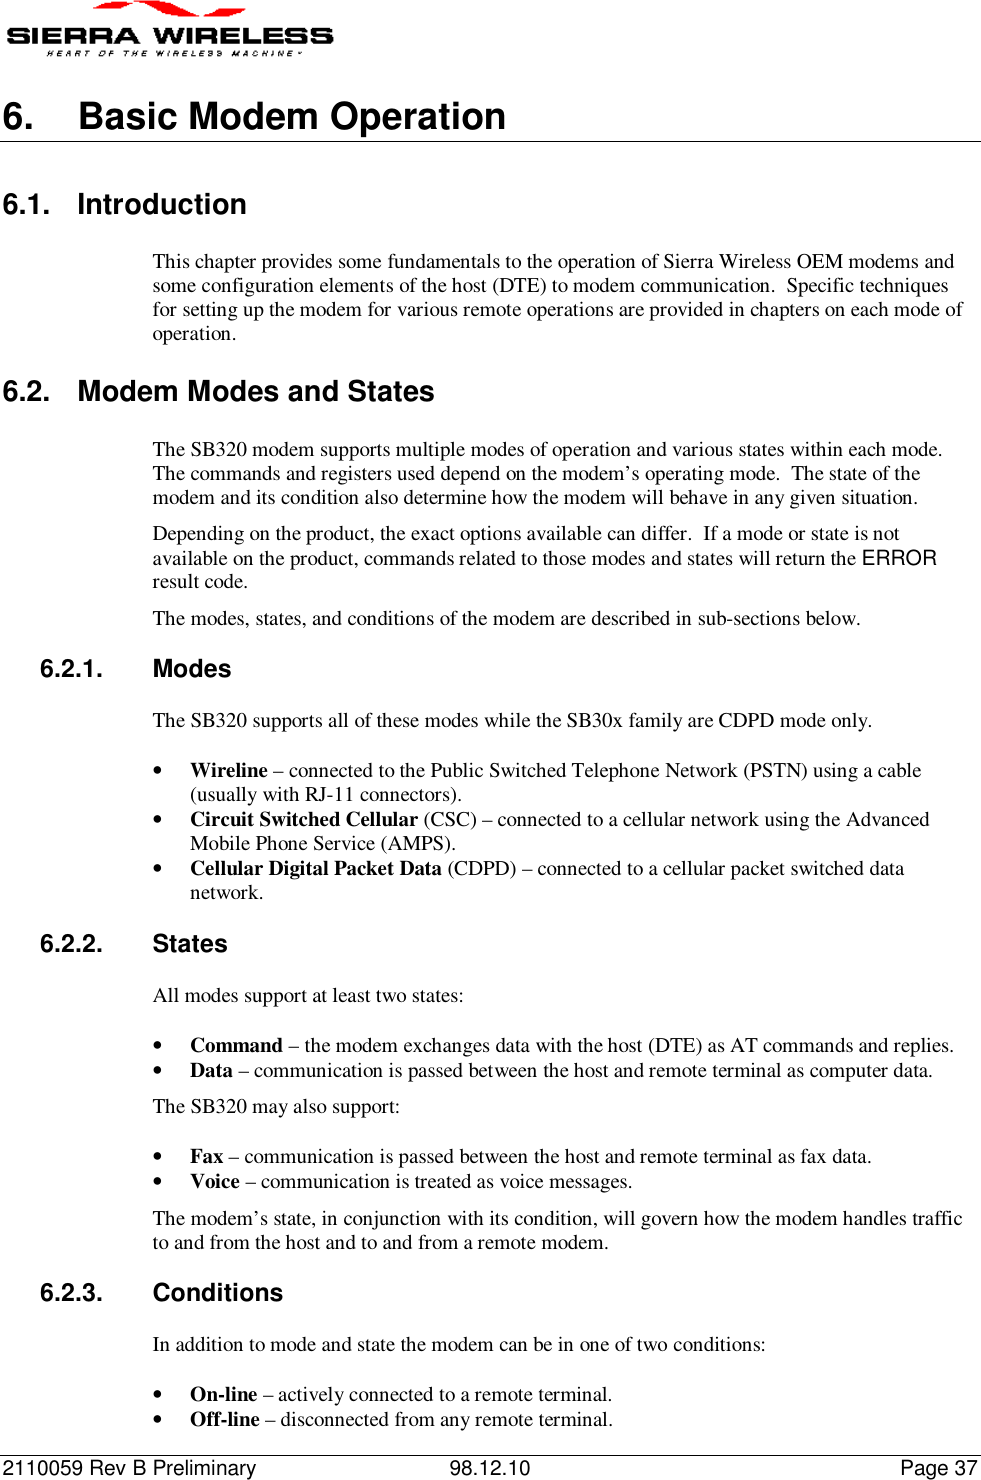 2110059 Rev B Preliminary 98.12.10 Page 376.  Basic Modem Operation6.1. IntroductionThis chapter provides some fundamentals to the operation of Sierra Wireless OEM modems andsome configuration elements of the host (DTE) to modem communication.  Specific techniquesfor setting up the modem for various remote operations are provided in chapters on each mode ofoperation.6.2. Modem Modes and StatesThe SB320 modem supports multiple modes of operation and various states within each mode.The commands and registers used depend on the modem’s operating mode.  The state of themodem and its condition also determine how the modem will behave in any given situation.Depending on the product, the exact options available can differ.  If a mode or state is notavailable on the product, commands related to those modes and states will return the ERRORresult code.The modes, states, and conditions of the modem are described in sub-sections below.6.2.1. ModesThe SB320 supports all of these modes while the SB30x family are CDPD mode only.• Wireline – connected to the Public Switched Telephone Network (PSTN) using a cable(usually with RJ-11 connectors).• Circuit Switched Cellular (CSC) – connected to a cellular network using the AdvancedMobile Phone Service (AMPS).• Cellular Digital Packet Data (CDPD) – connected to a cellular packet switched datanetwork.6.2.2. StatesAll modes support at least two states:• Command – the modem exchanges data with the host (DTE) as AT commands and replies.• Data – communication is passed between the host and remote terminal as computer data.The SB320 may also support:• Fax – communication is passed between the host and remote terminal as fax data.• Voice – communication is treated as voice messages.The modem’s state, in conjunction with its condition, will govern how the modem handles trafficto and from the host and to and from a remote modem.6.2.3. ConditionsIn addition to mode and state the modem can be in one of two conditions:• On-line – actively connected to a remote terminal.• Off-line – disconnected from any remote terminal.